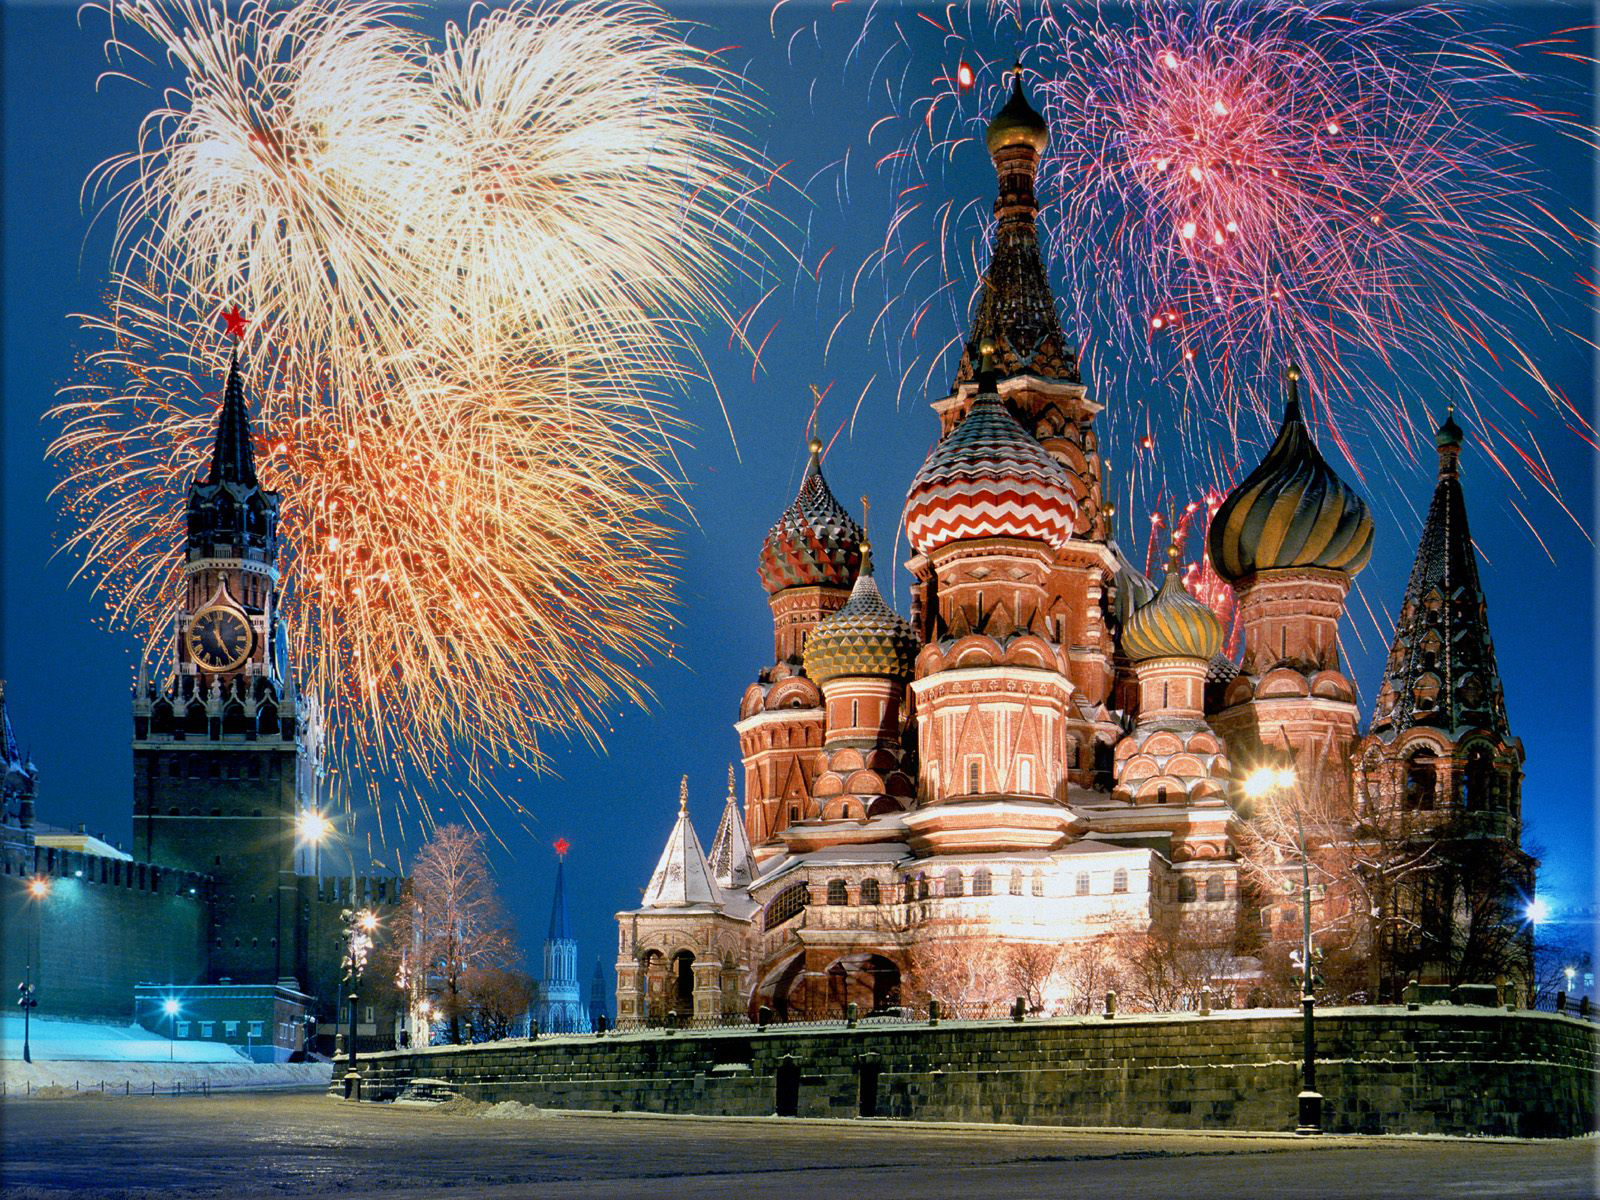 Saint Basil's Cathedral in Moscow is consecrated on July 12th, 1561.